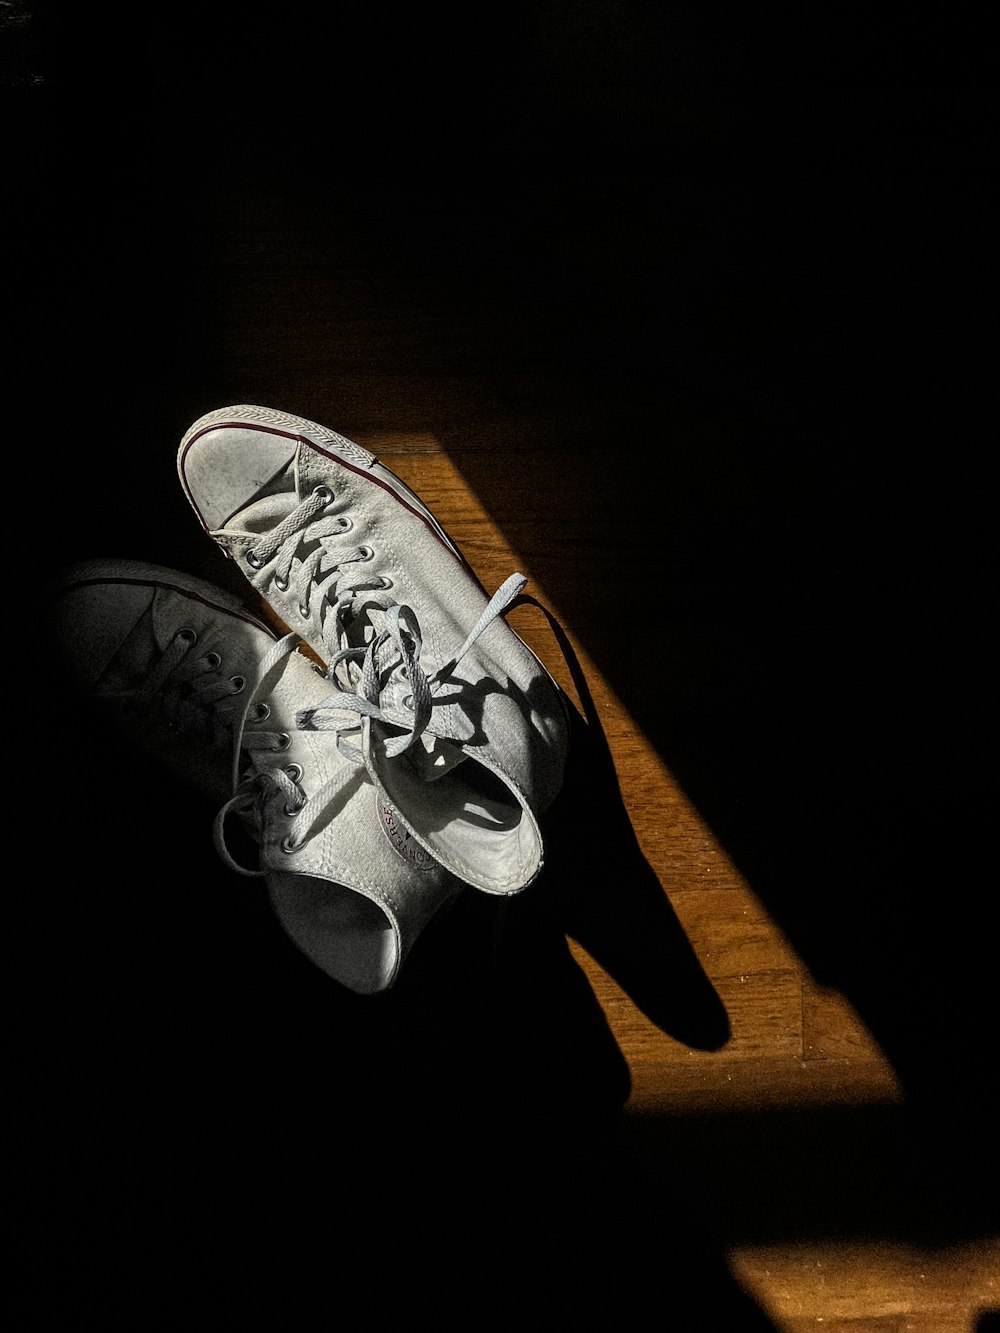 a pair of white sneakers sitting on top of a wooden floor